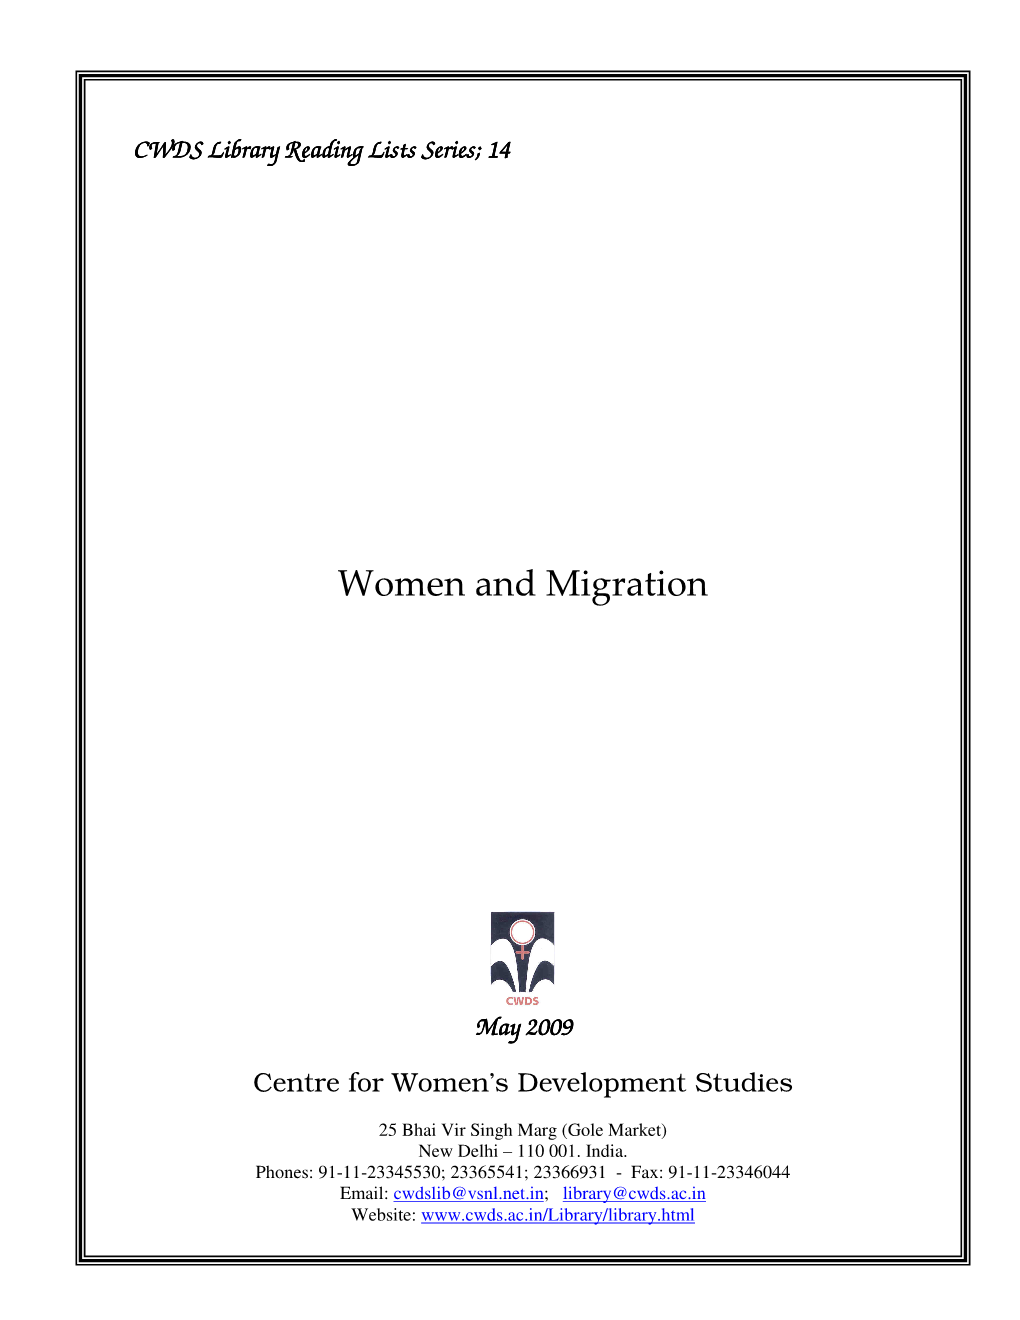 Women and Migration